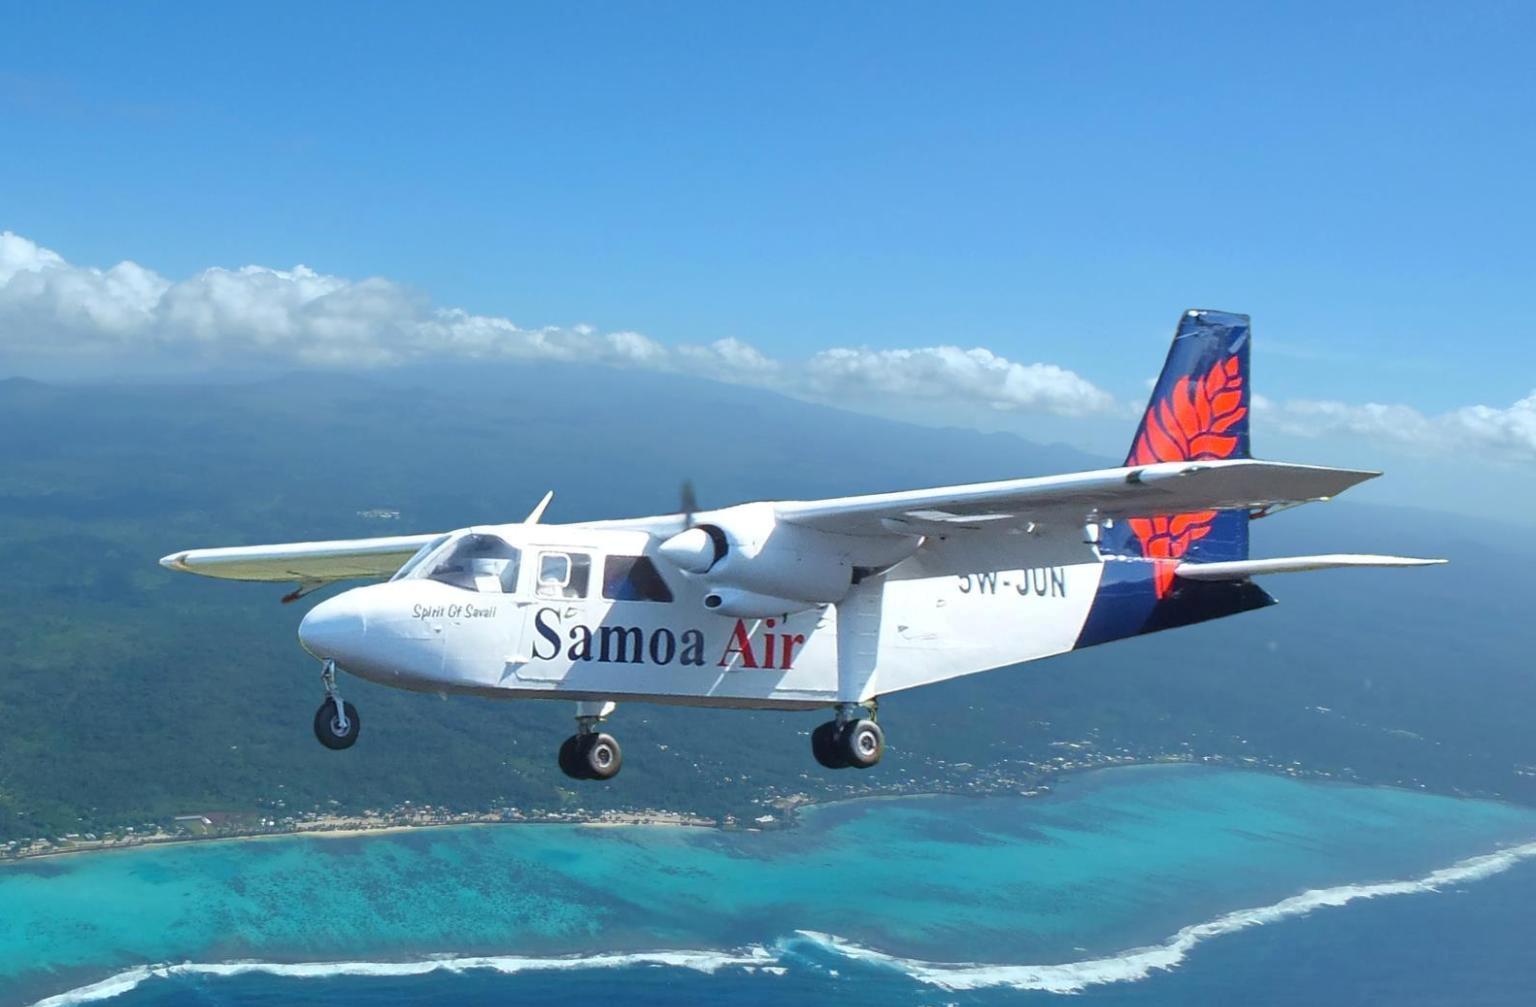 In 2013 Samoa Air gained global press coverage by becoming the first airline in the world to charge customers by body weight plus luggage.